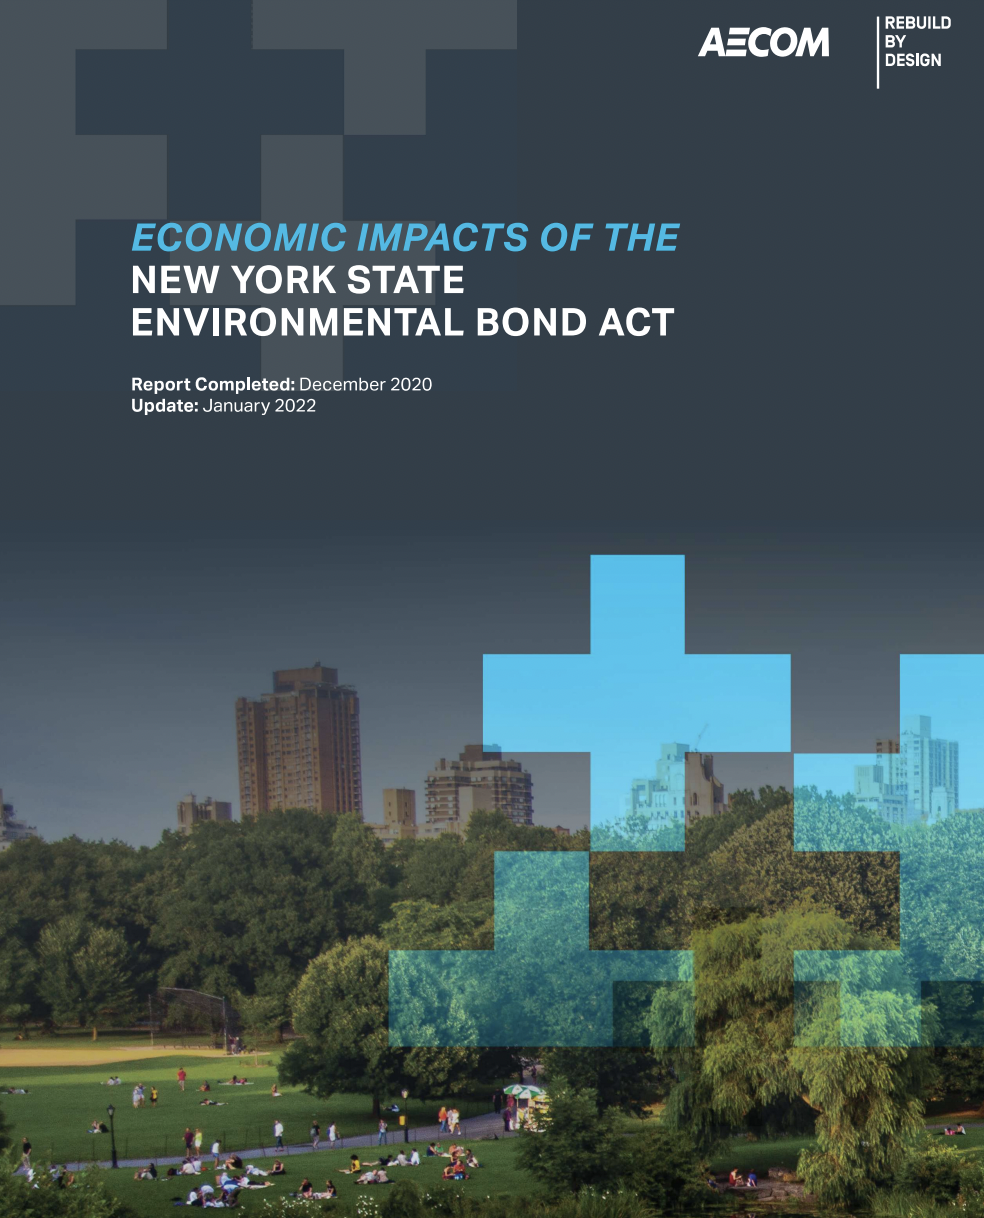 Updated report finds the New York State Environmental Bond Act would support 84,000 jobs and $8.7 billion in project spending under new funding proposal